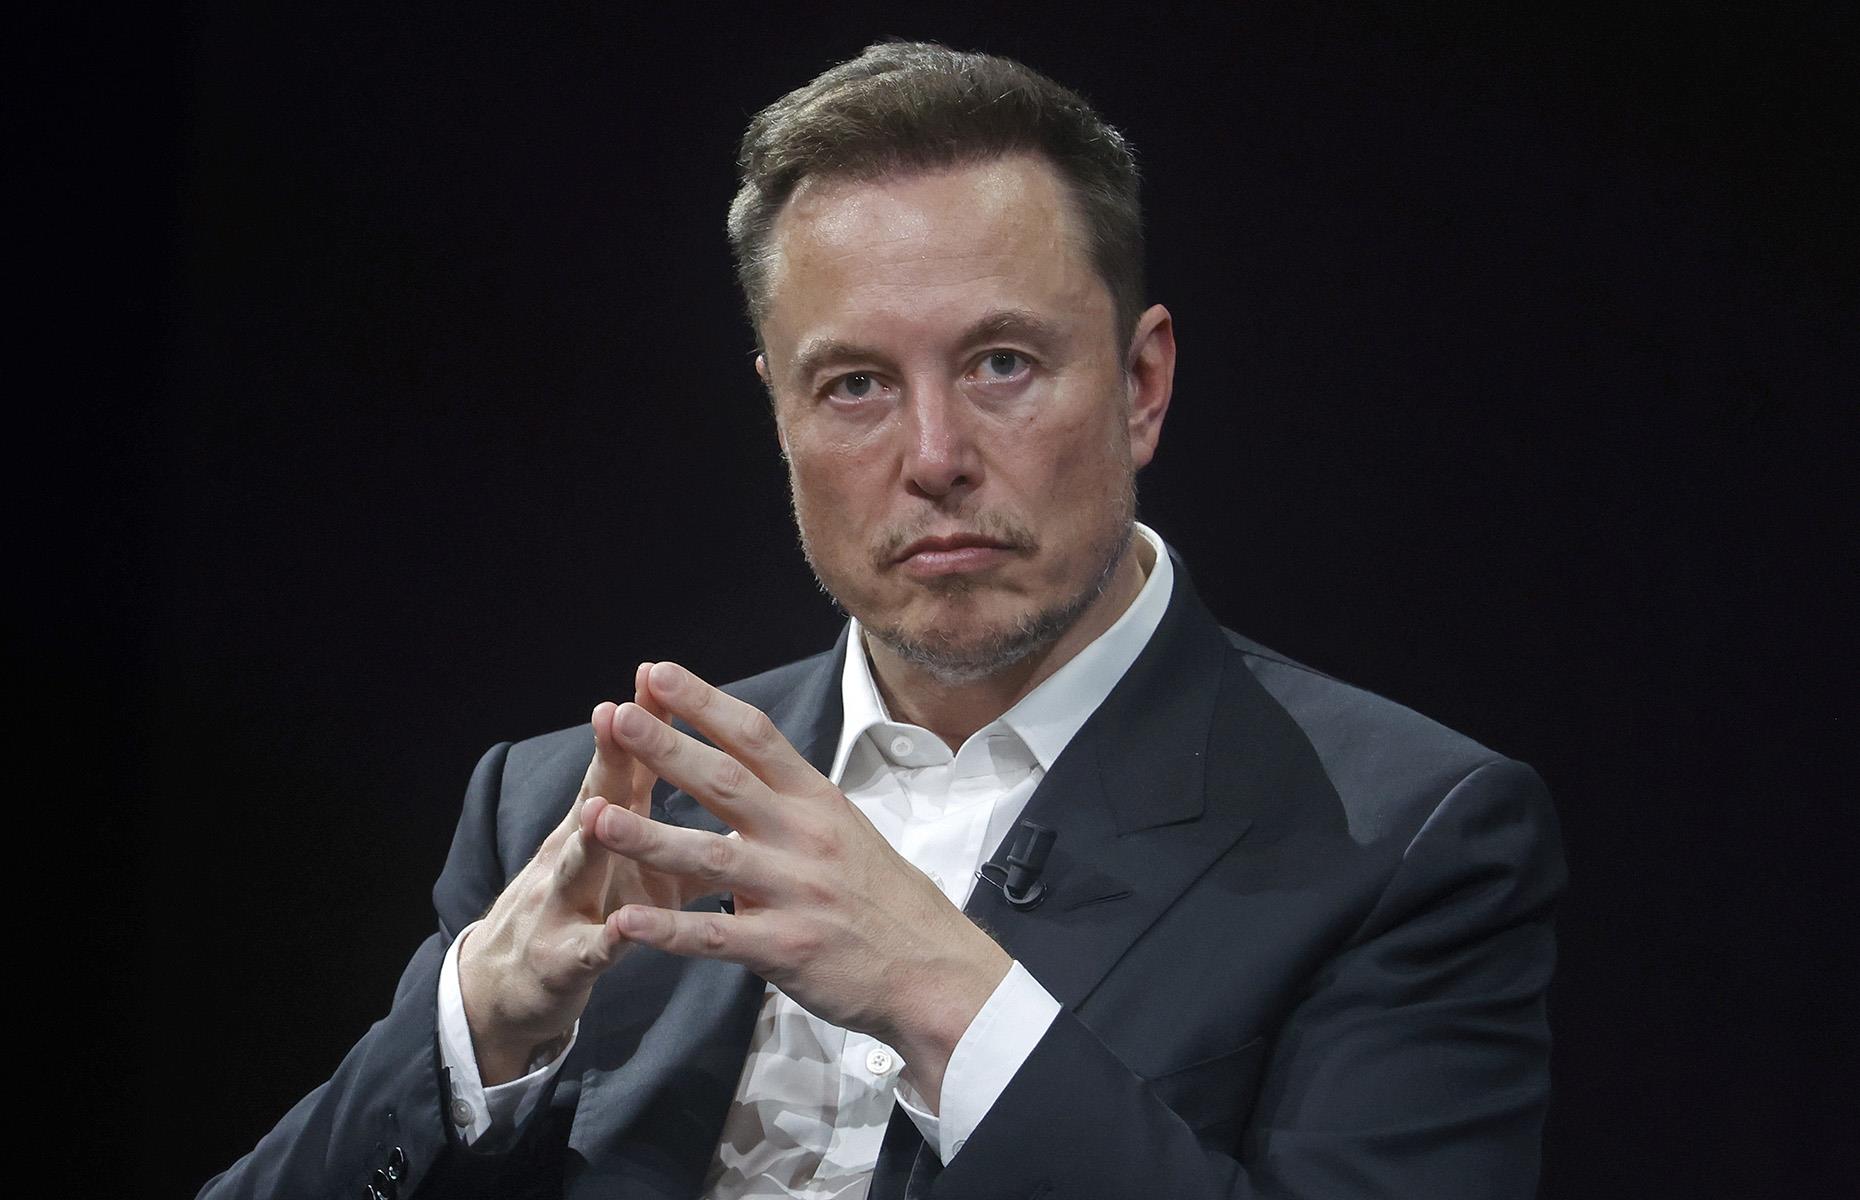 <p>In October 2022, Elon Musk sensationally snapped up Twitter in a $44 billion deal, one of his biggest business moves to date.</p>  <p>He rebranded the social media platform to X in July, but this is far from the only controversial change he plans to make at the company.</p>  <p>In a livestreamed conversation with Israeli Prime Minister Benjamin Netanyahu in September 2023, Musk revealed that X is "moving to having a small, monthly payment for use of the X system."</p>  <p>He further claimed that the social media site has 550 million monthly users.</p>